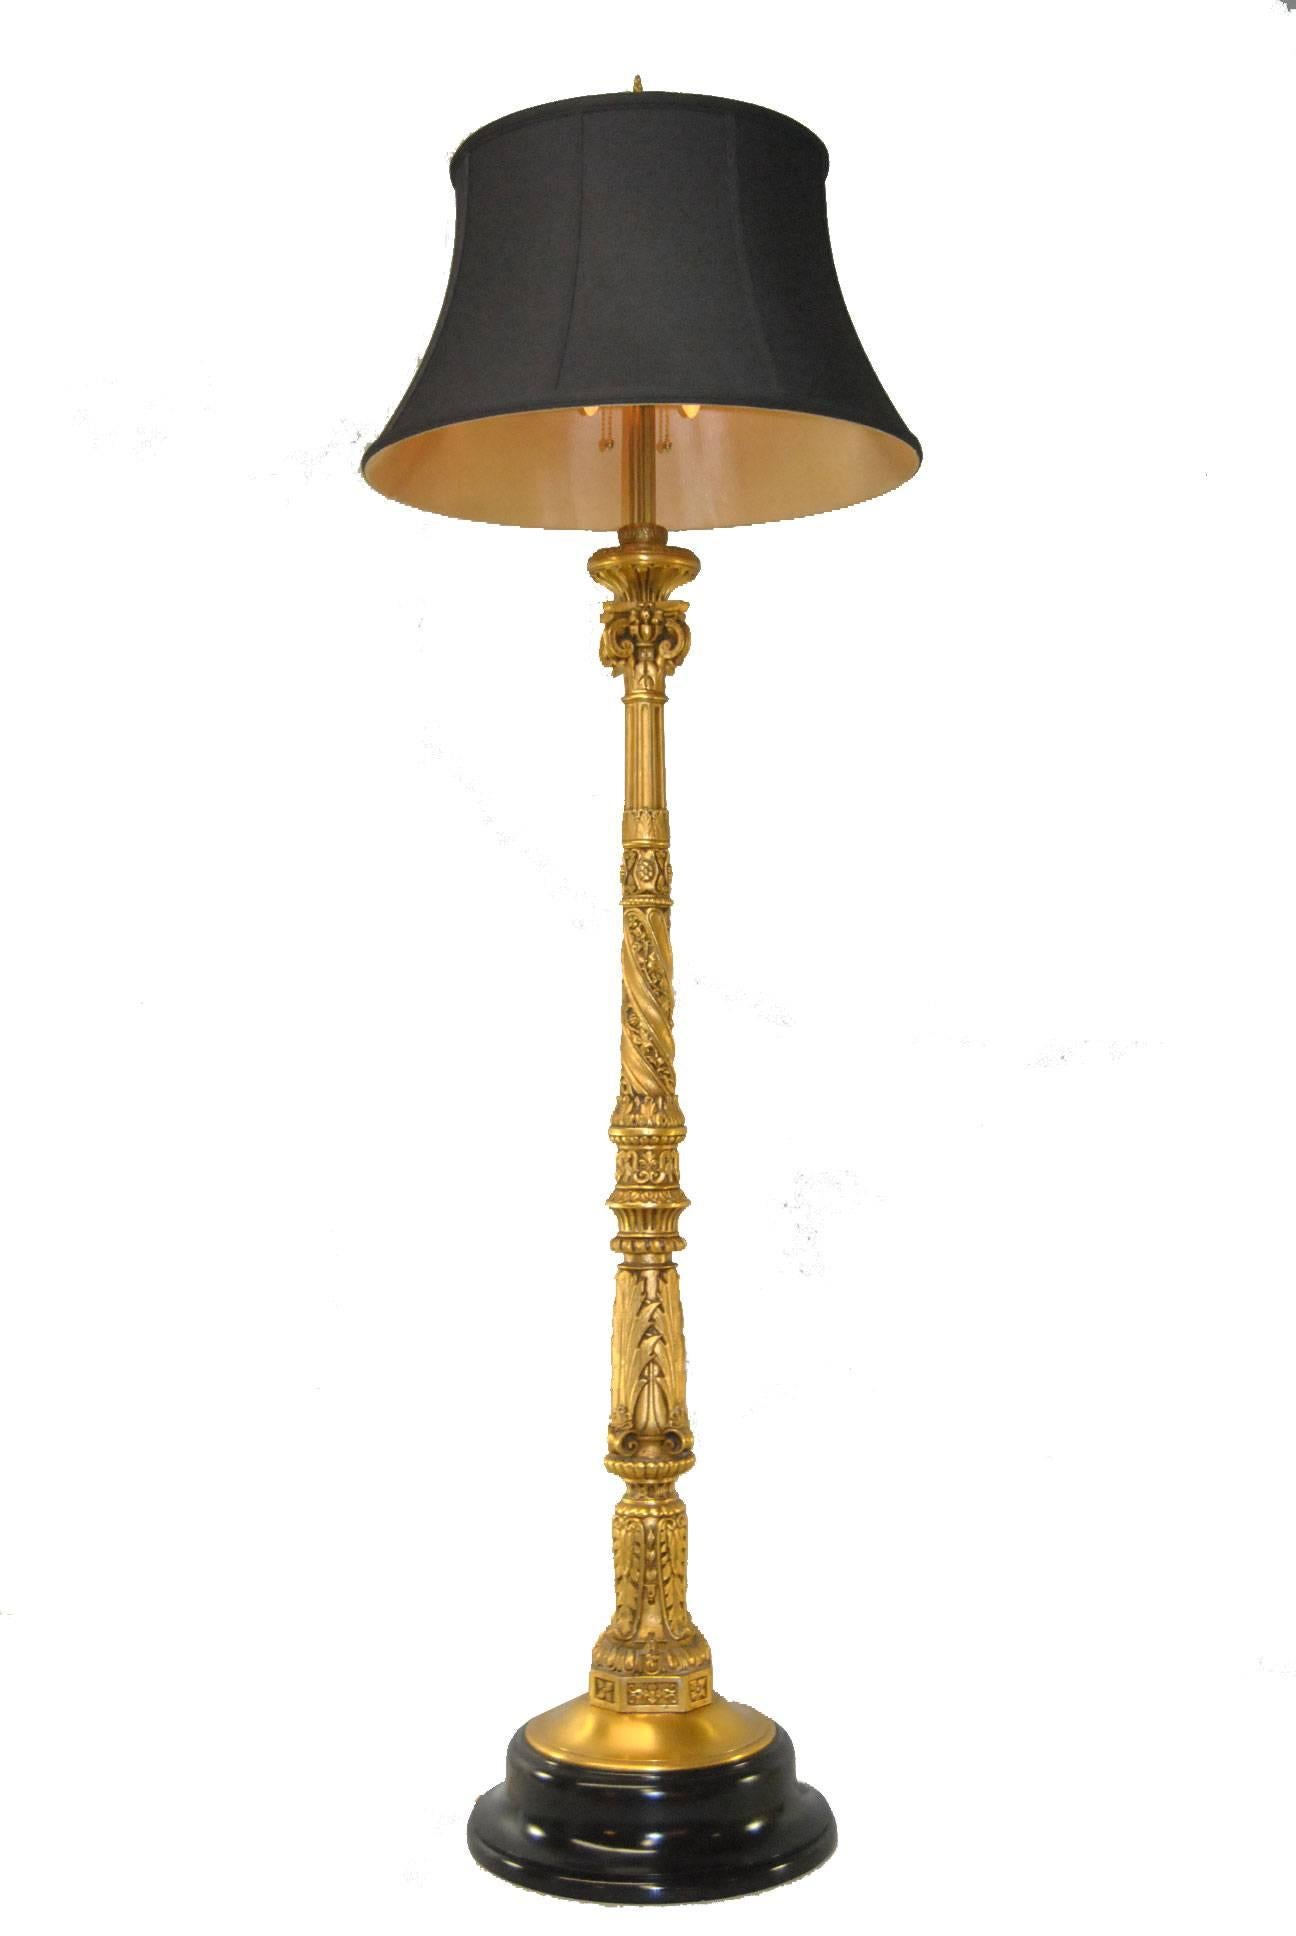 An impressive gilt bronze floor lamp. This turn-of-the-century floor lamp features ornate floral and scroll detailing. Double sockets have brass pulls. The base is black lacquered wood and the lamp has been rewired and is ready for use. The black